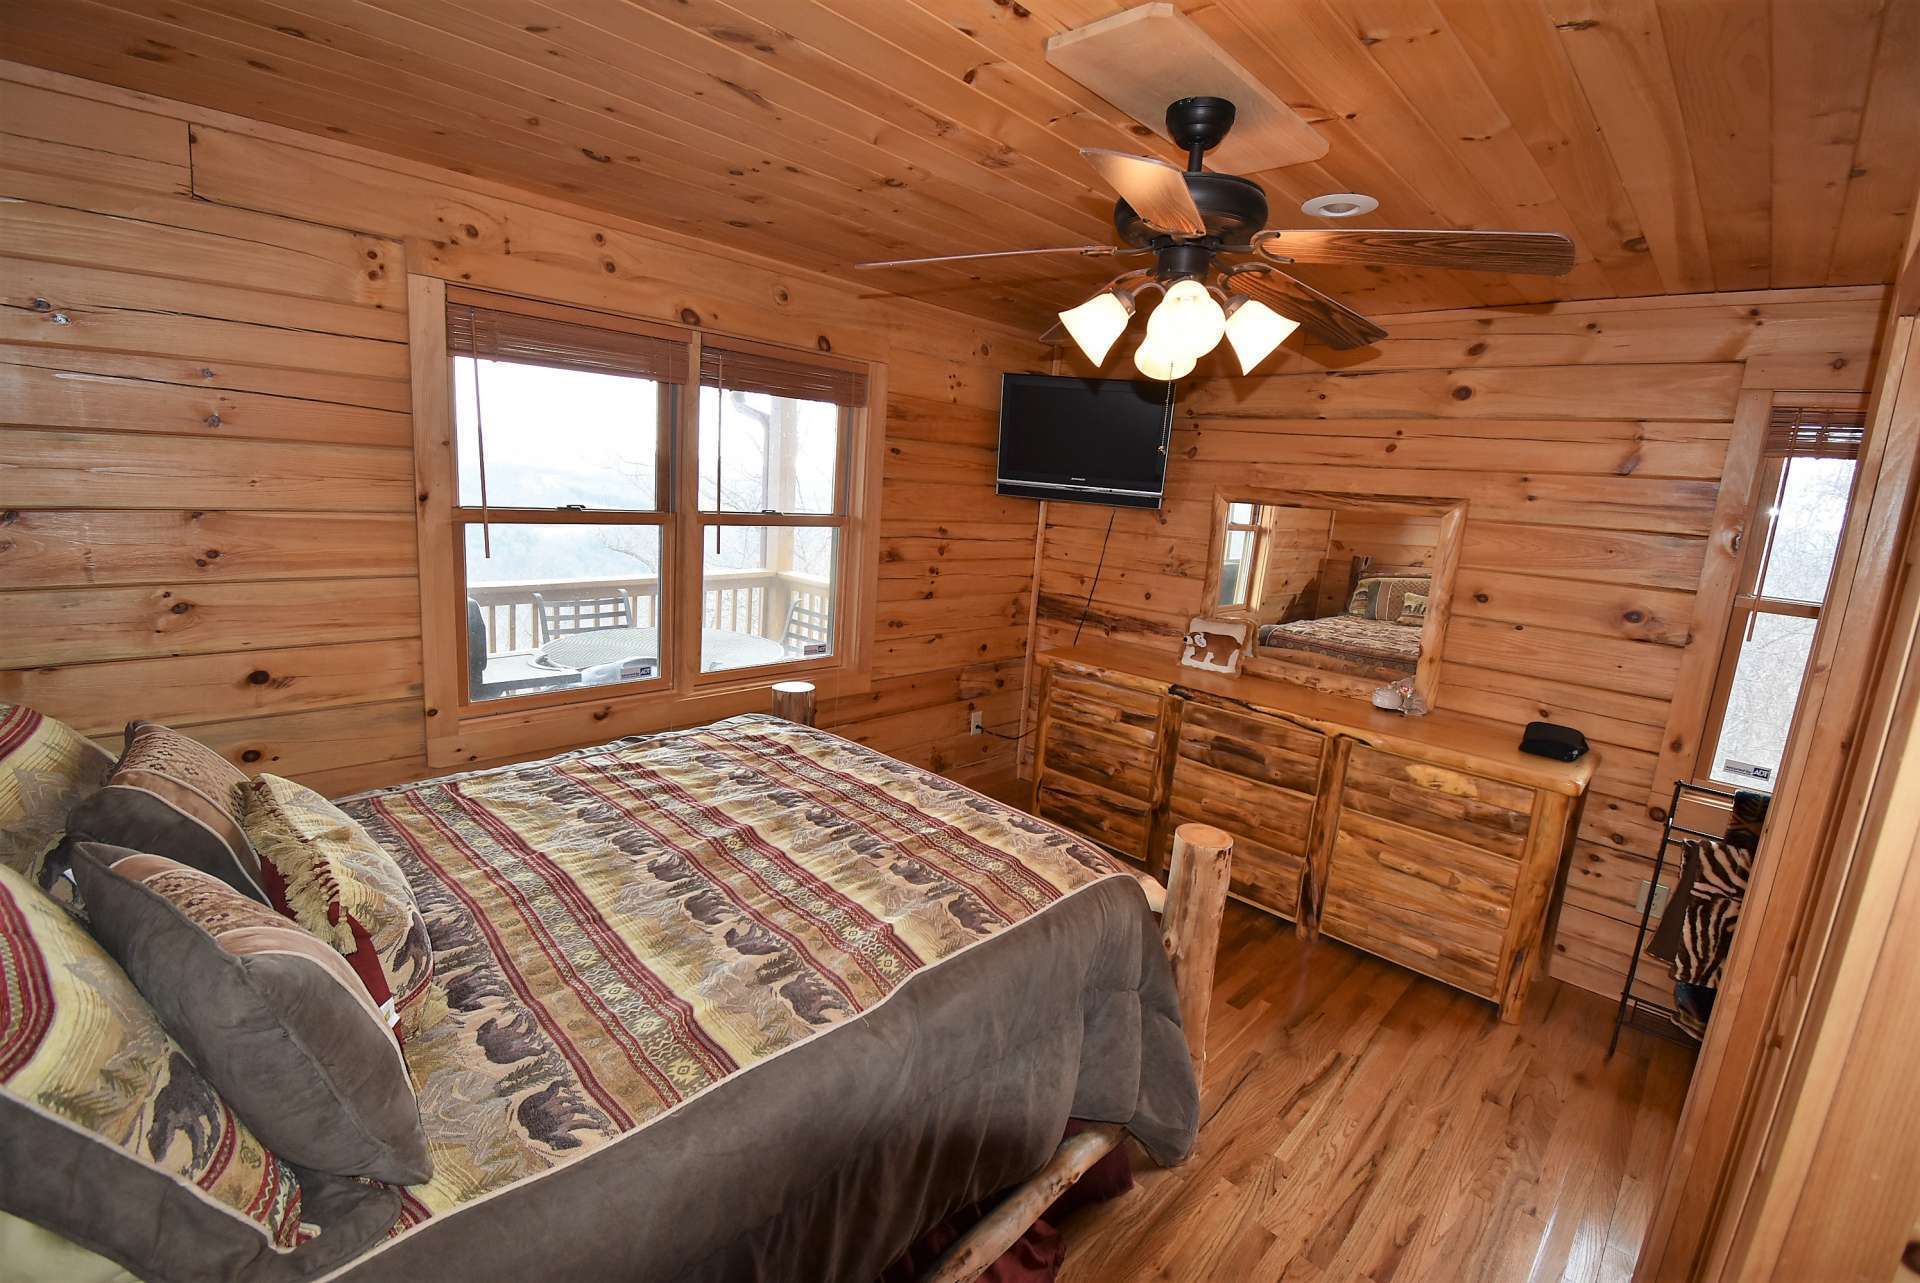 The main level master suite is spacious and features plenty of windows and a private bath.